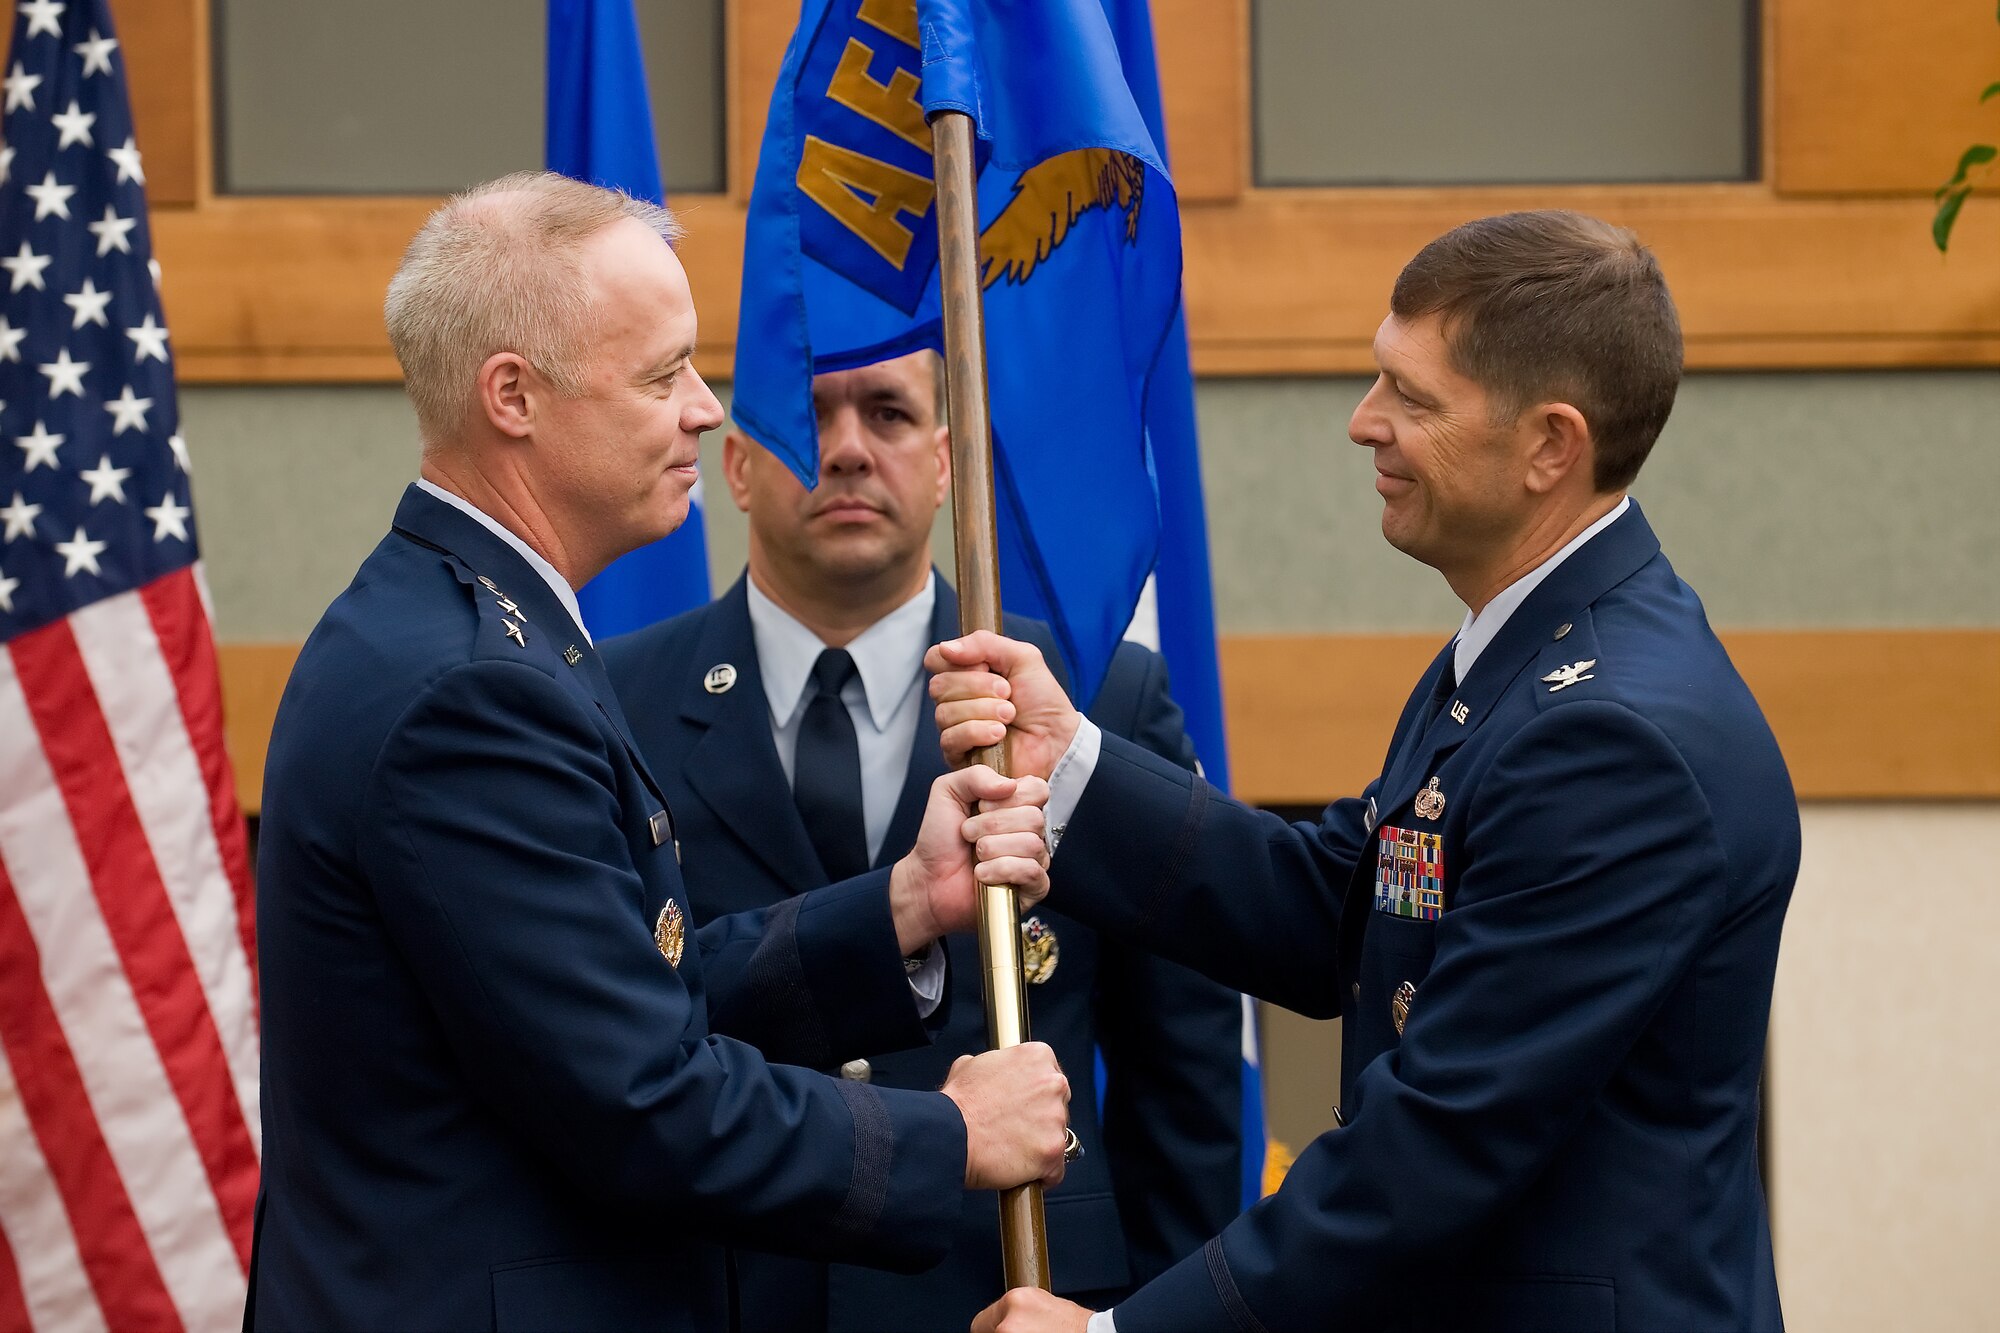 Col. Thomas C. Joyce accepts the Air Force Mortuary Affairs Operations Center guidon from Lt. Gen. Richard Y. Newton III, Deputy Chief of Staff for Manpower and Personnel, Headquarters U.S. Air Force, Washington, D.C., during a Change of Command ceremony Oct. 7. (U.S. Air Force photo/Roland Balik)